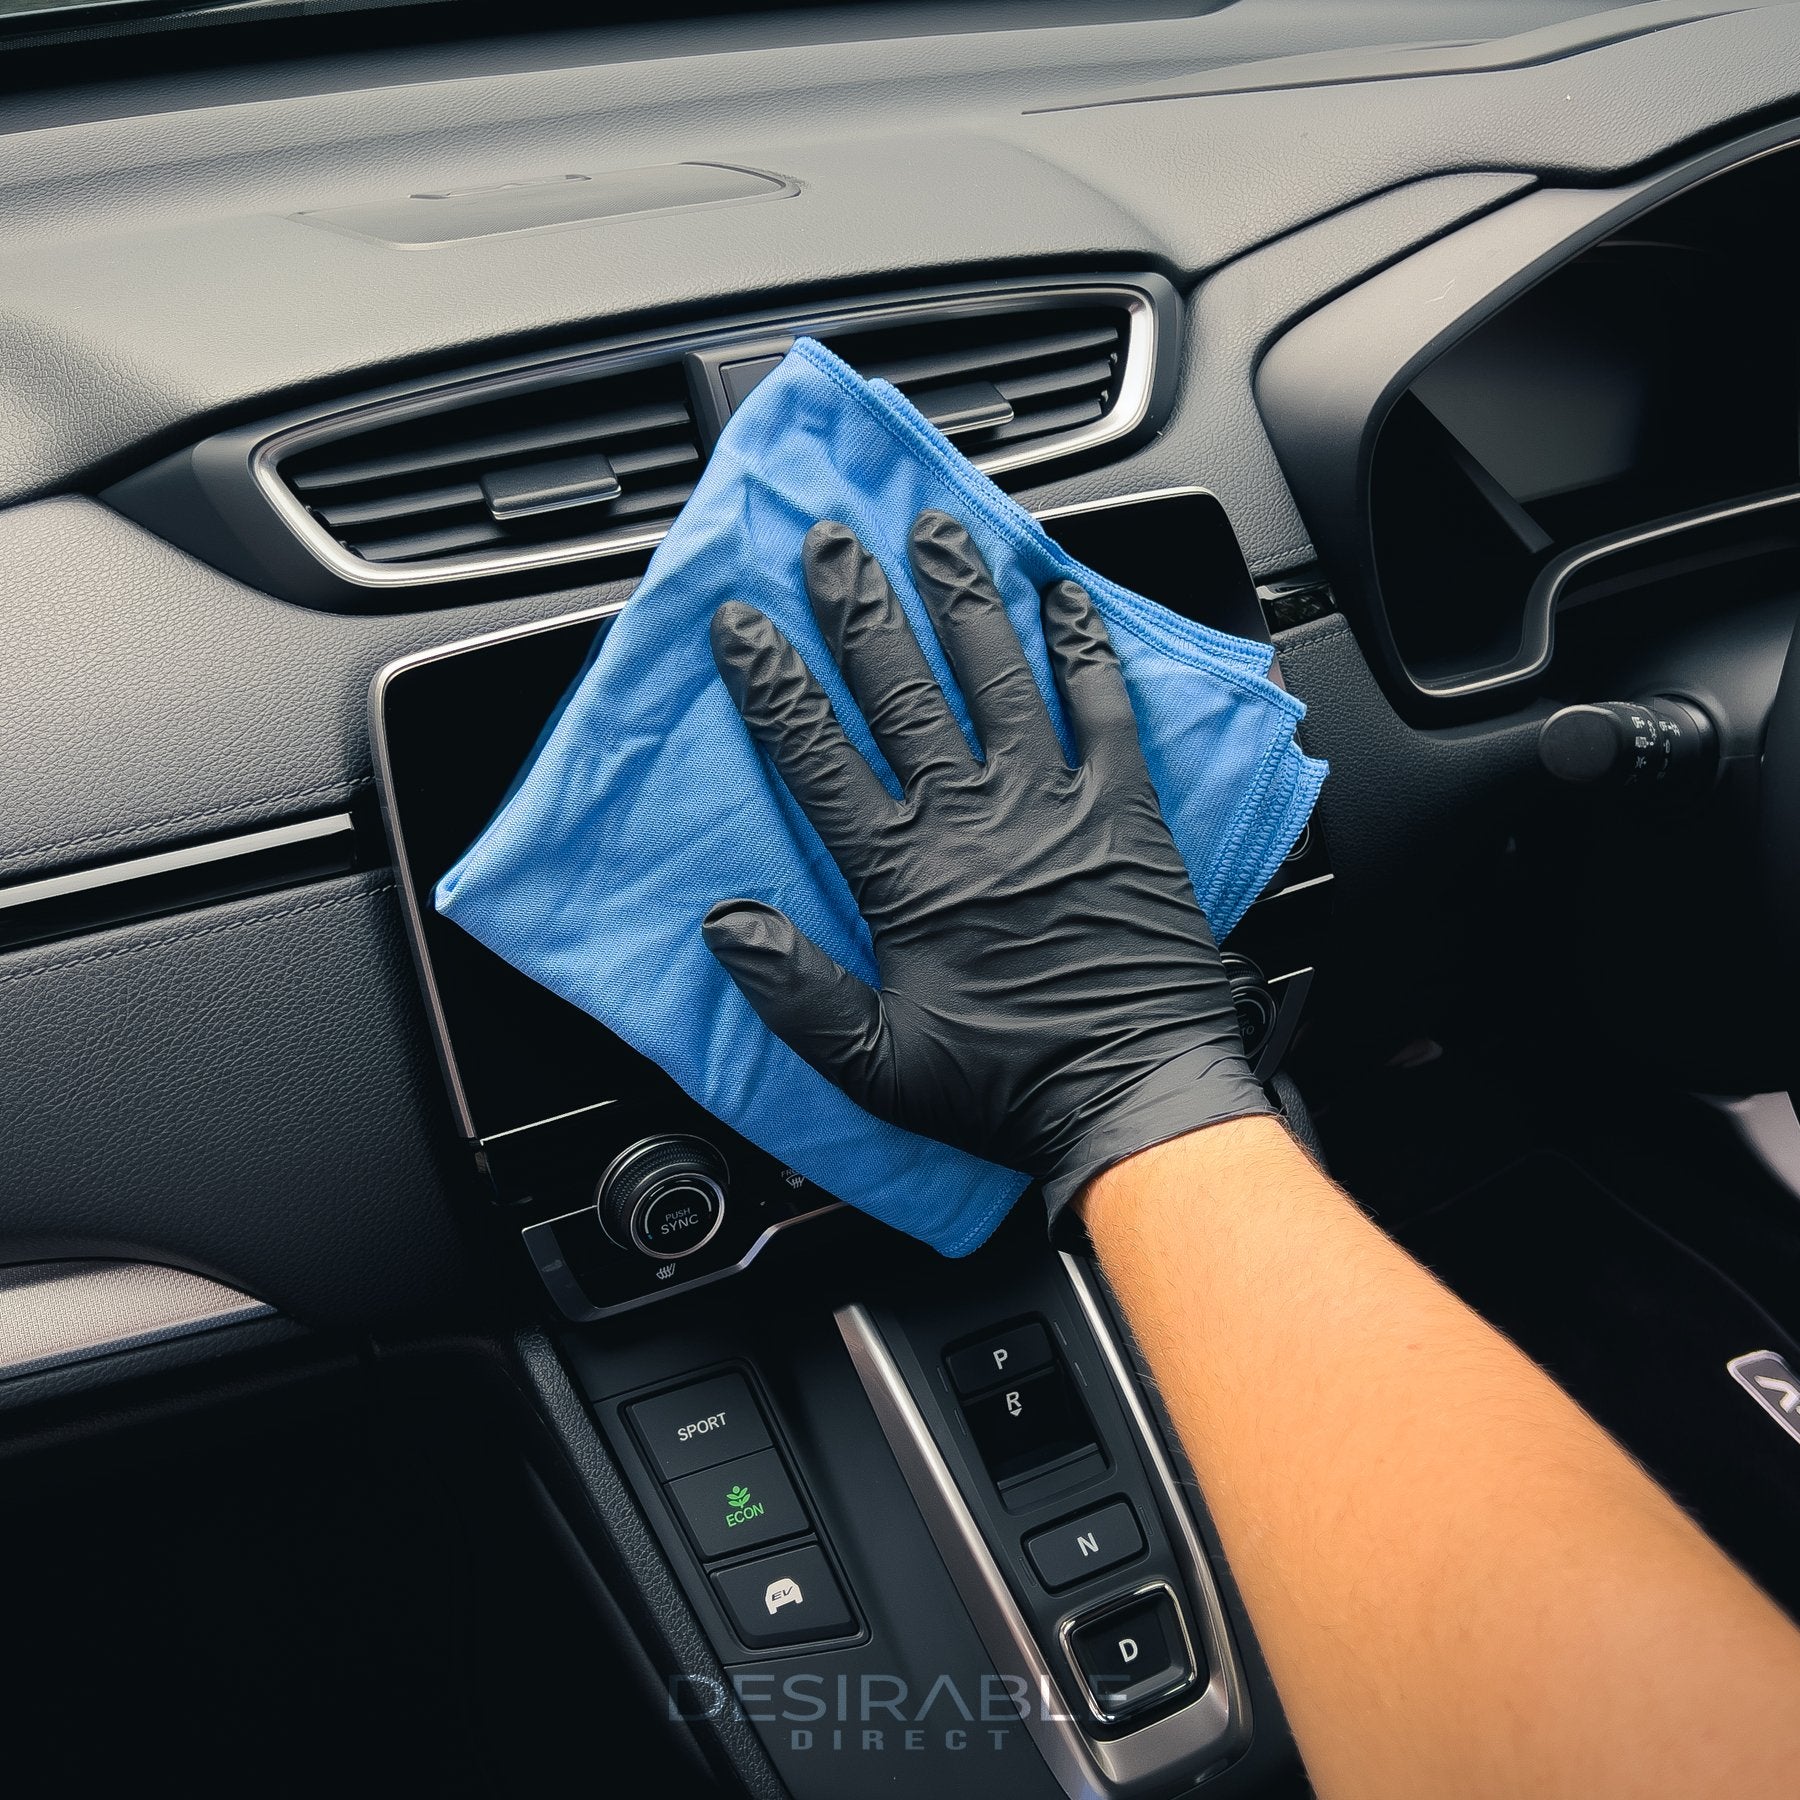 Car care microfibre blue glass cloth cleaning the entertainment screen in a grey car.